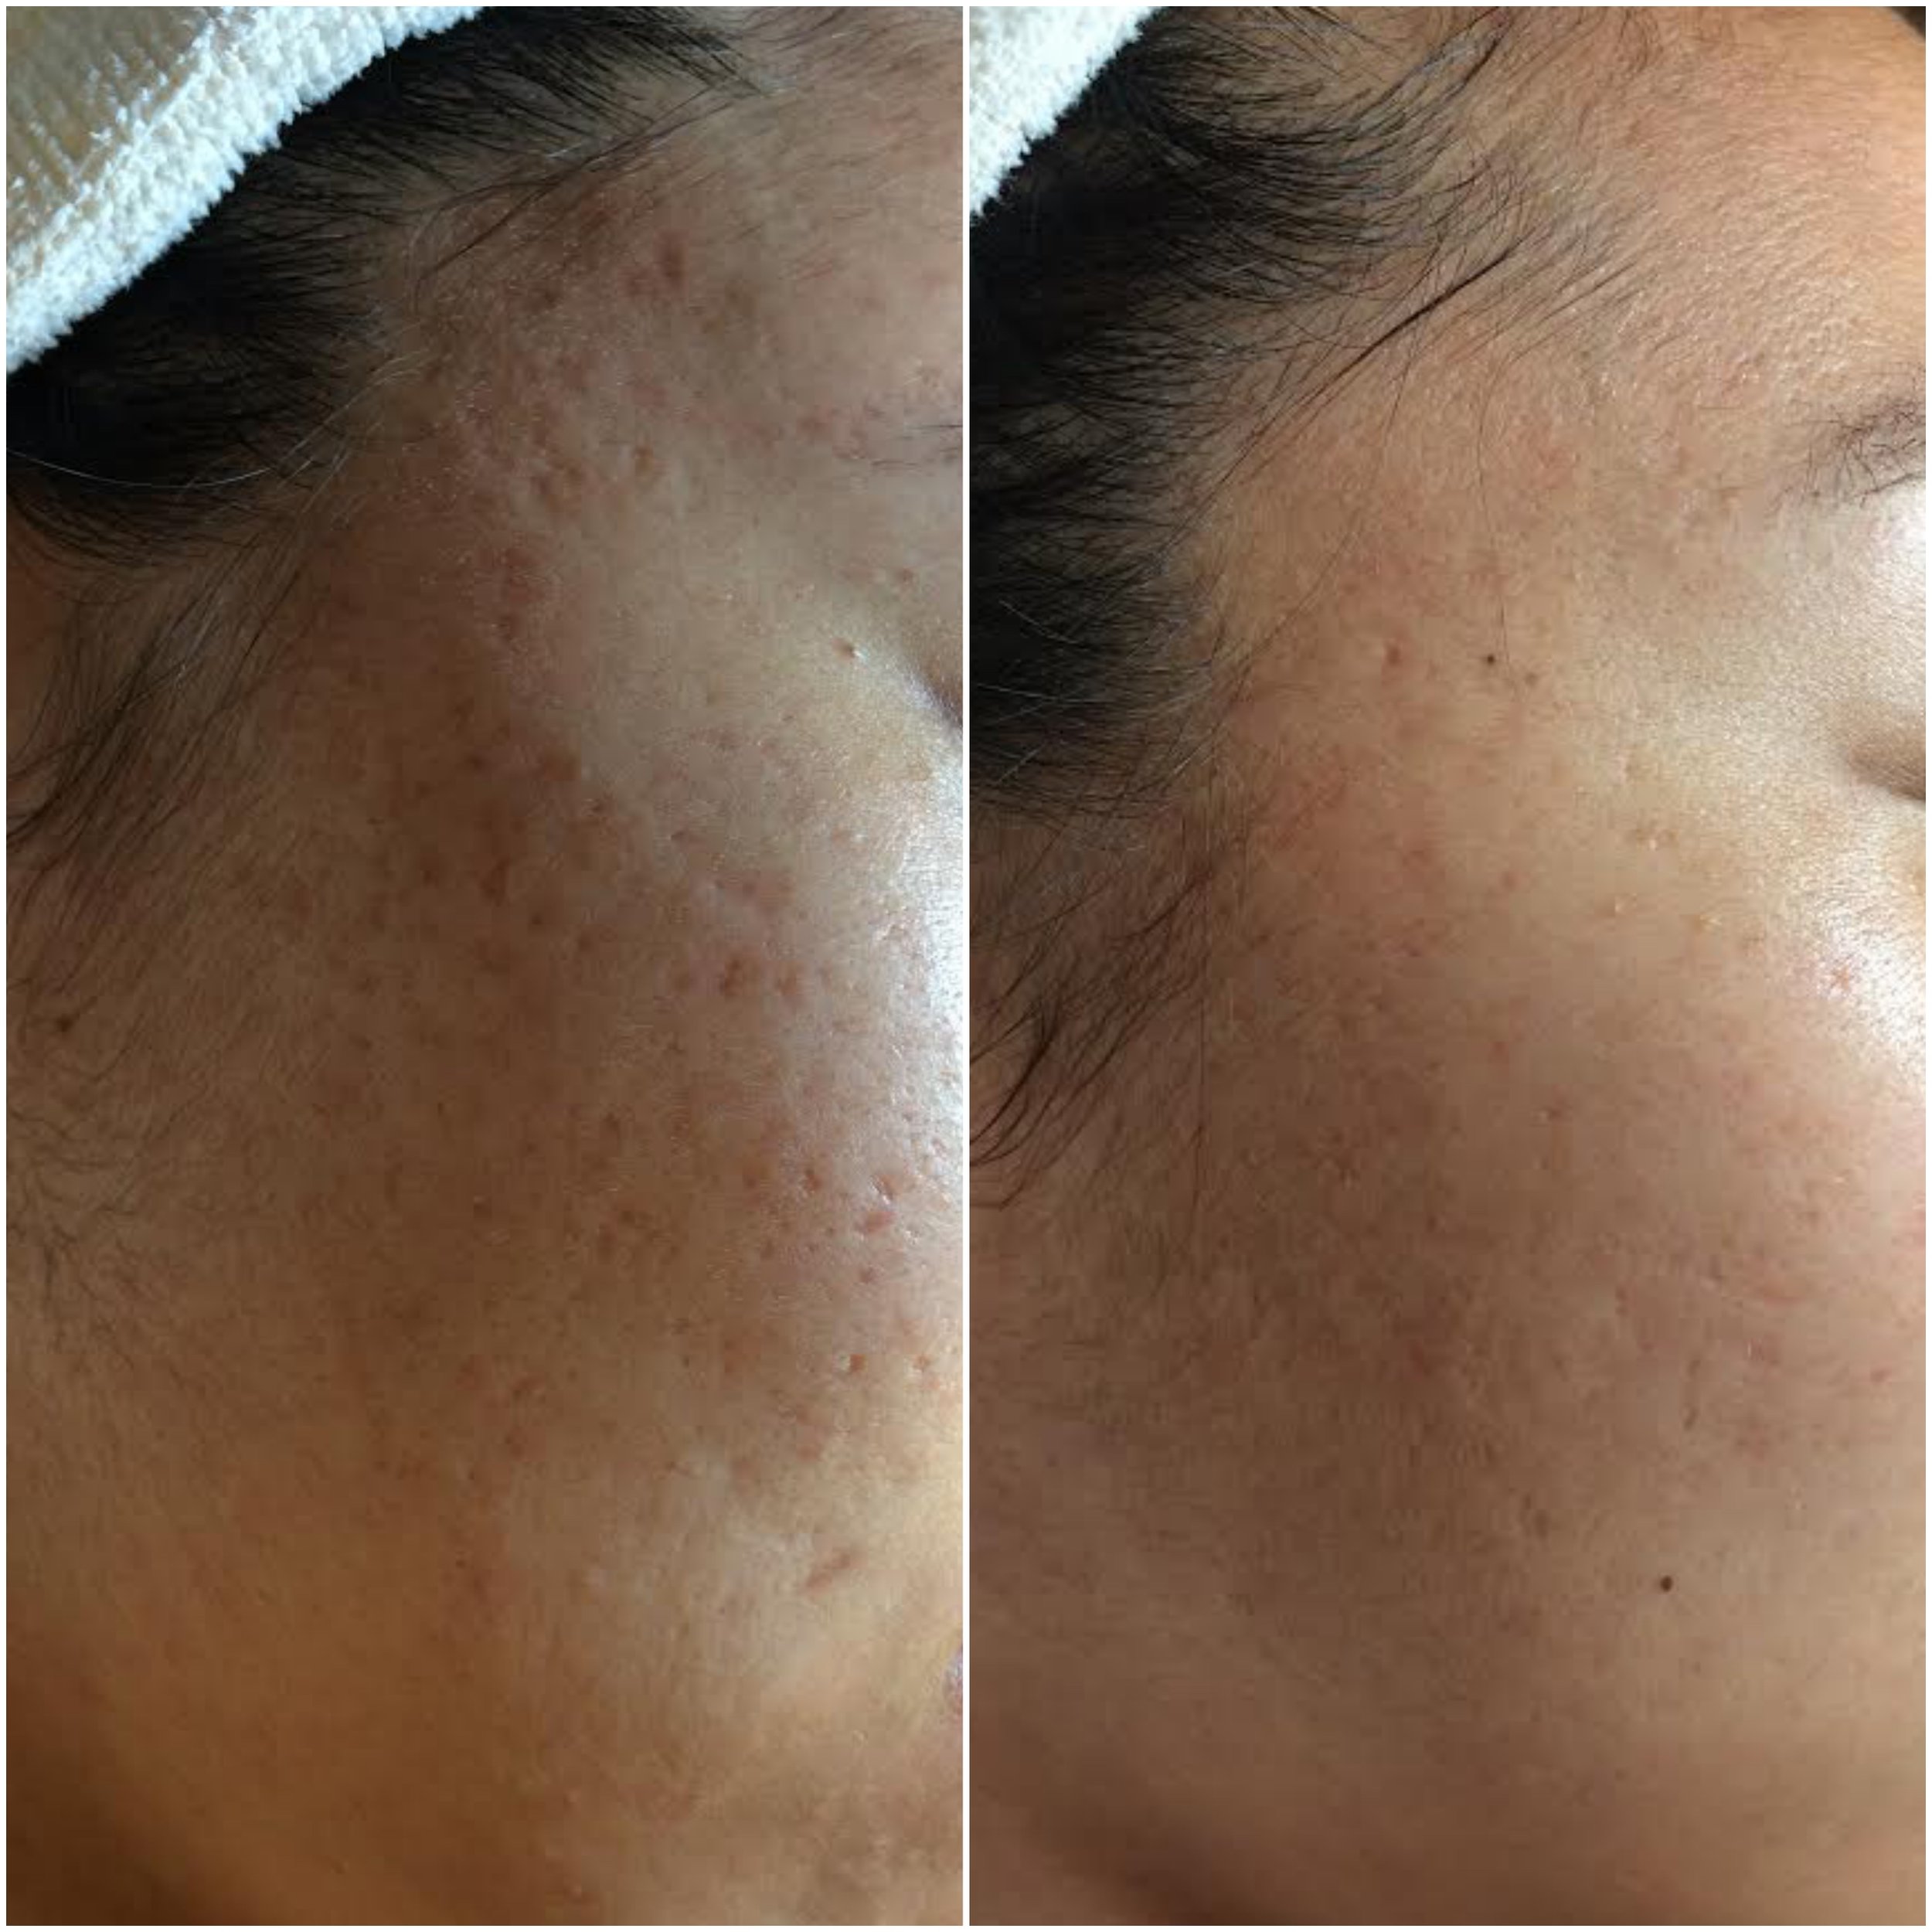  Acne pit scarring filled using human stem cell microneedling series 